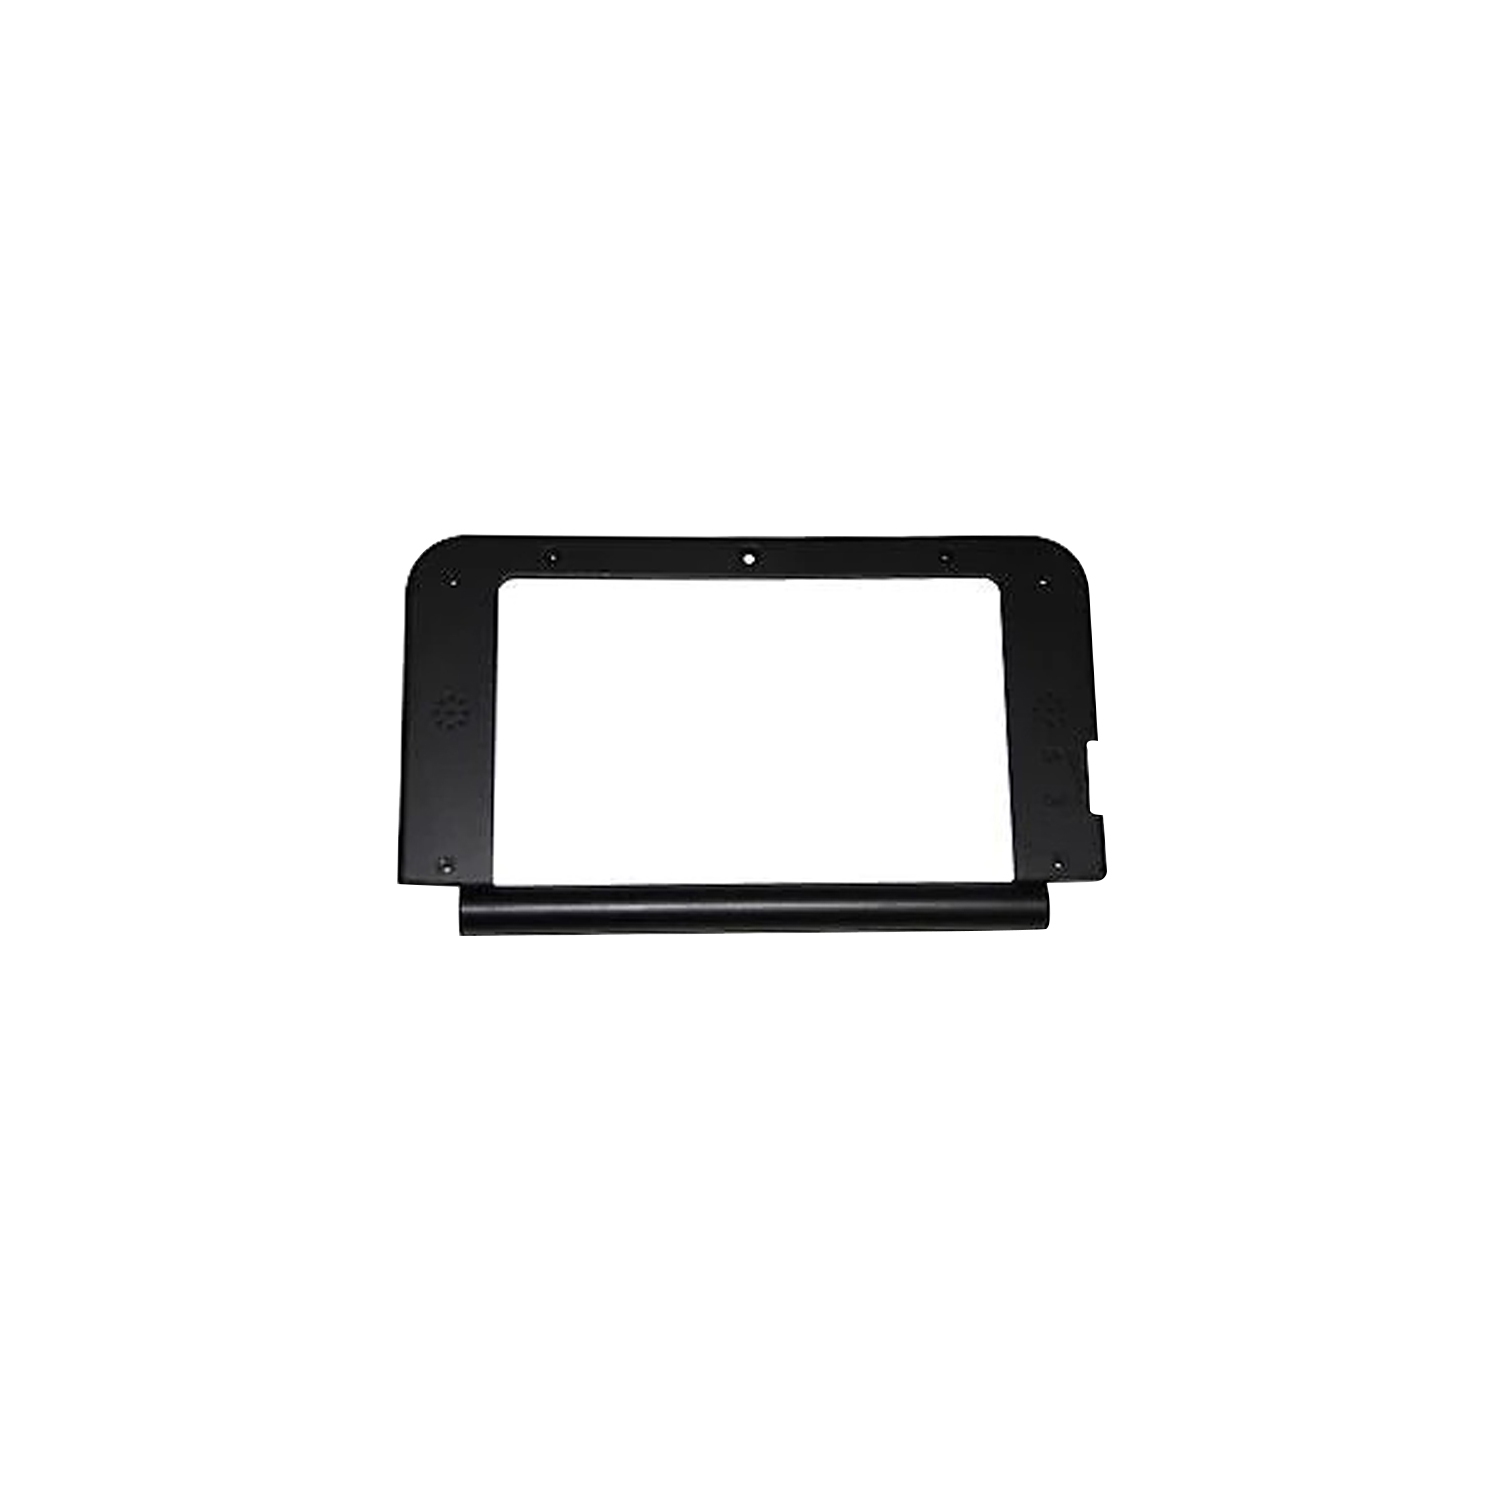 Replacement Front Top Housing Cover Shell For Nintendo 3DS XL - Black